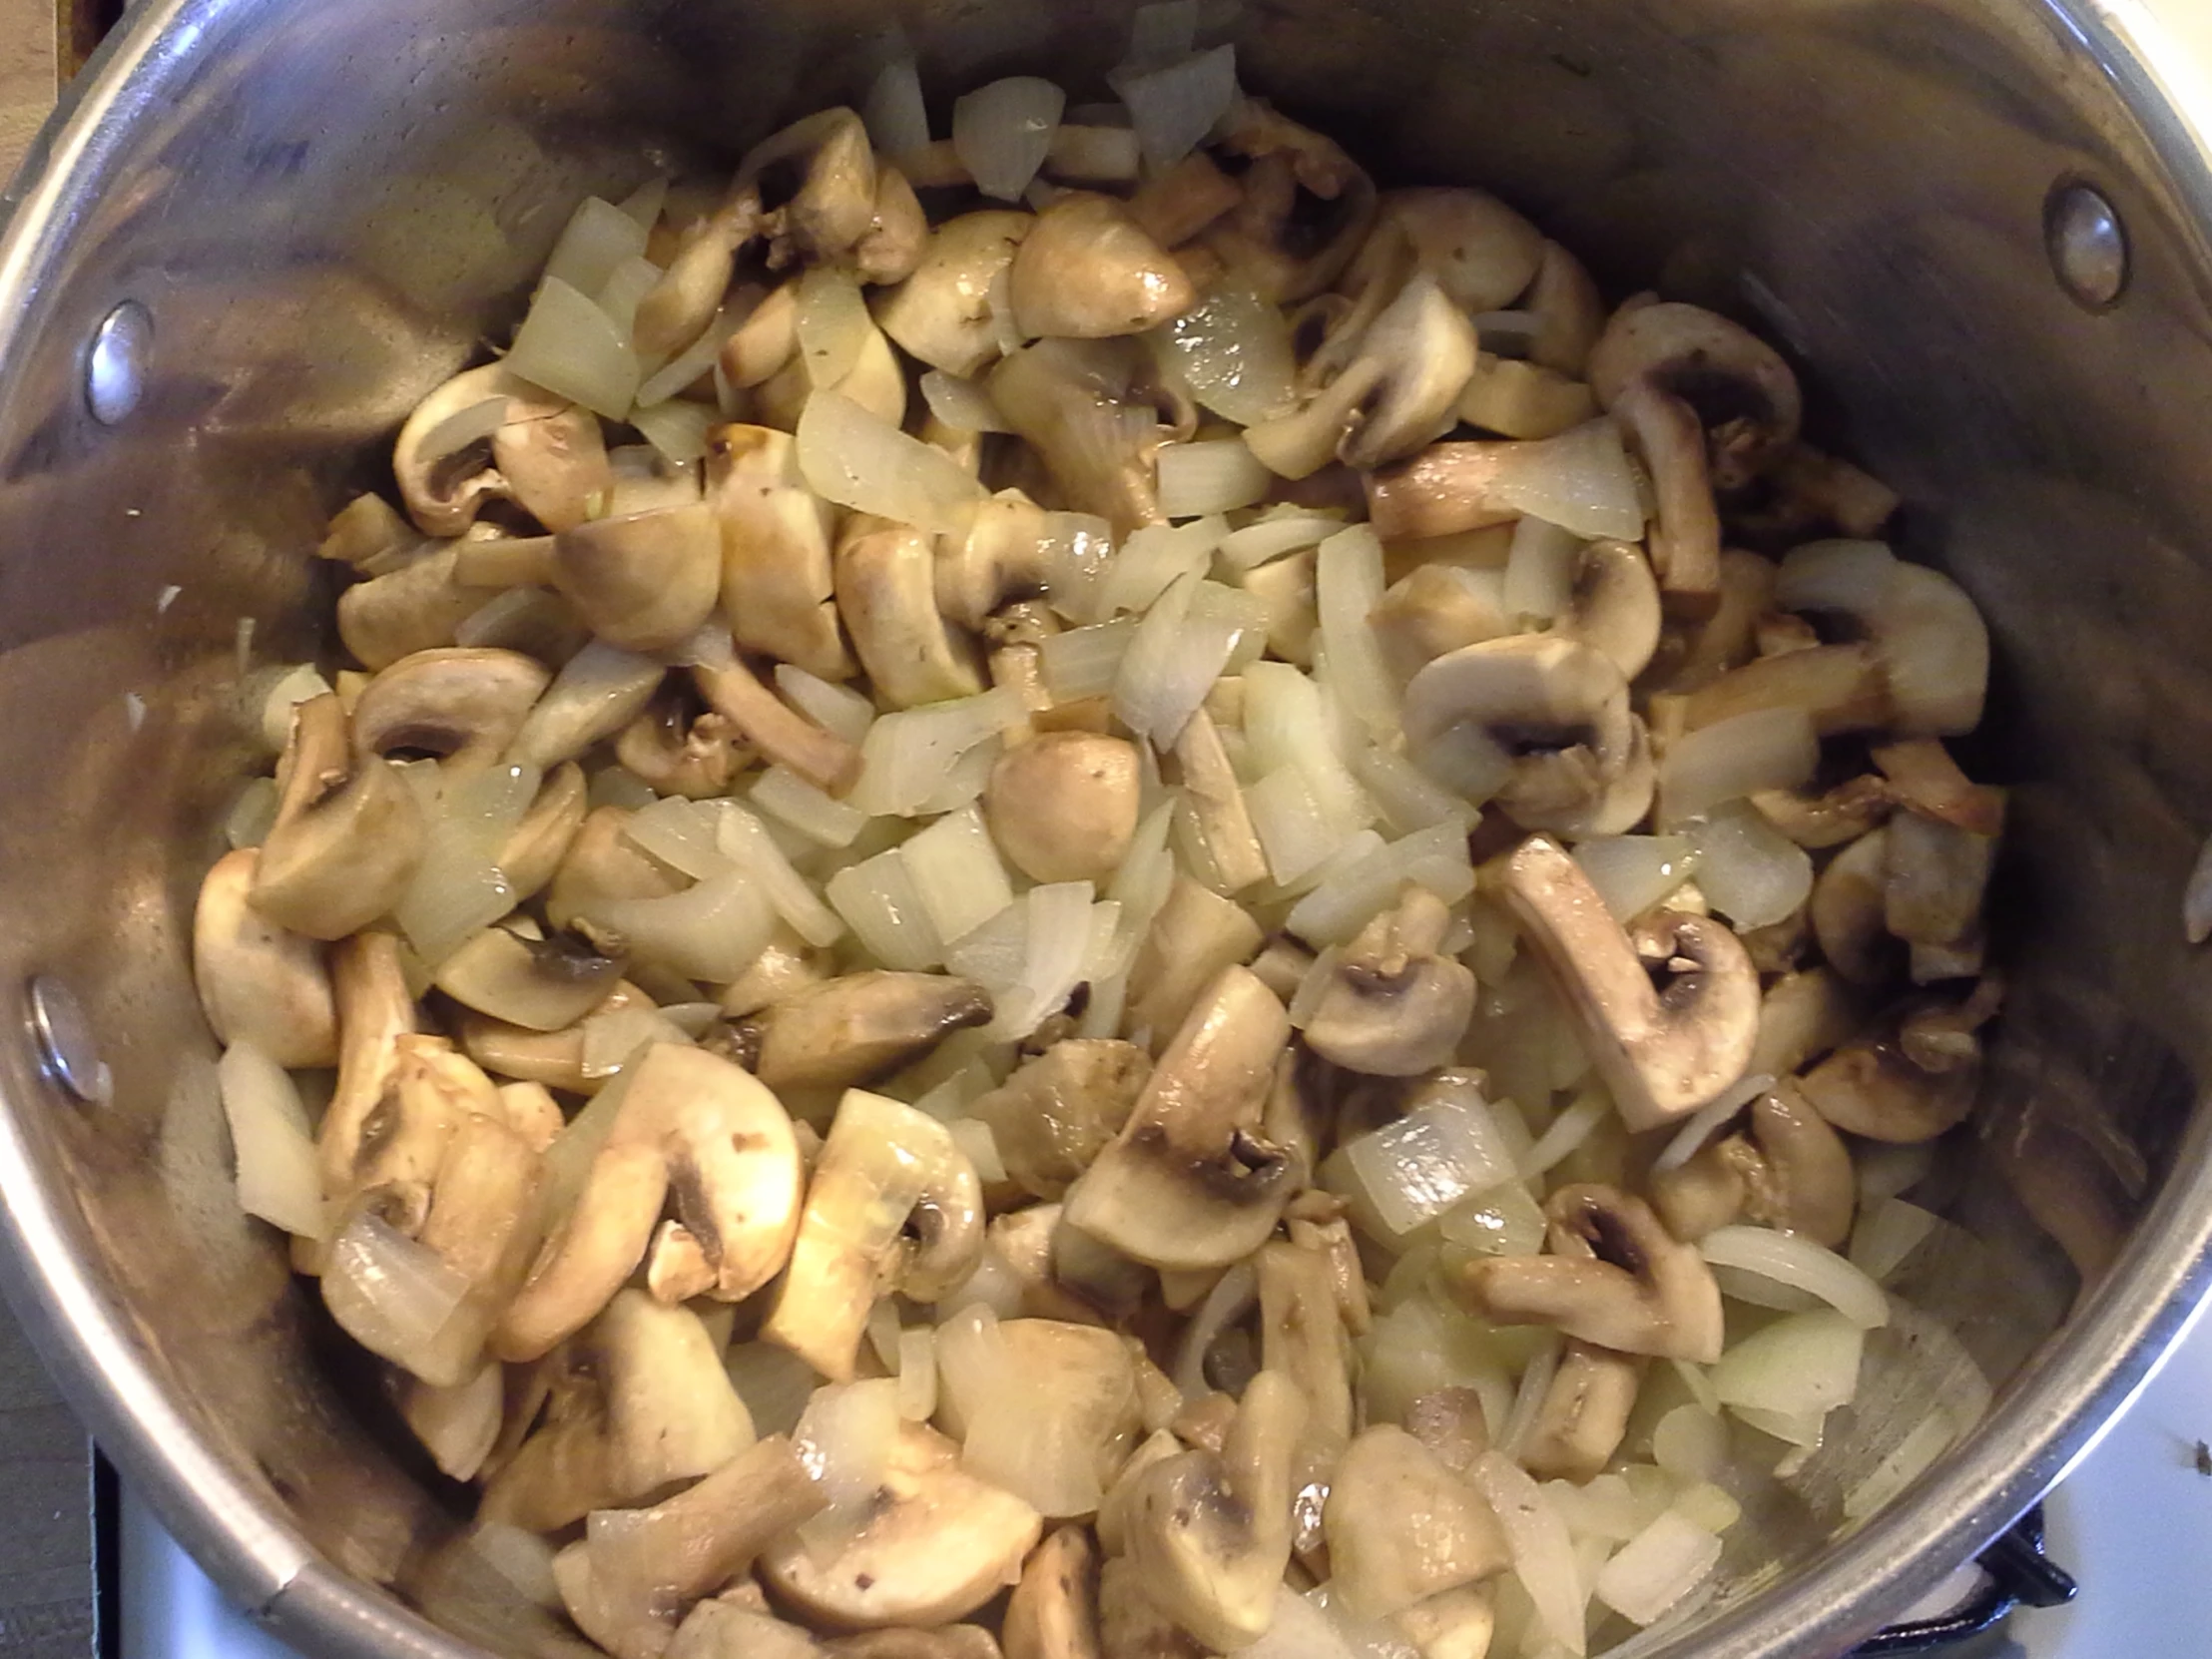 the cooked mushrooms are cooking in a pot